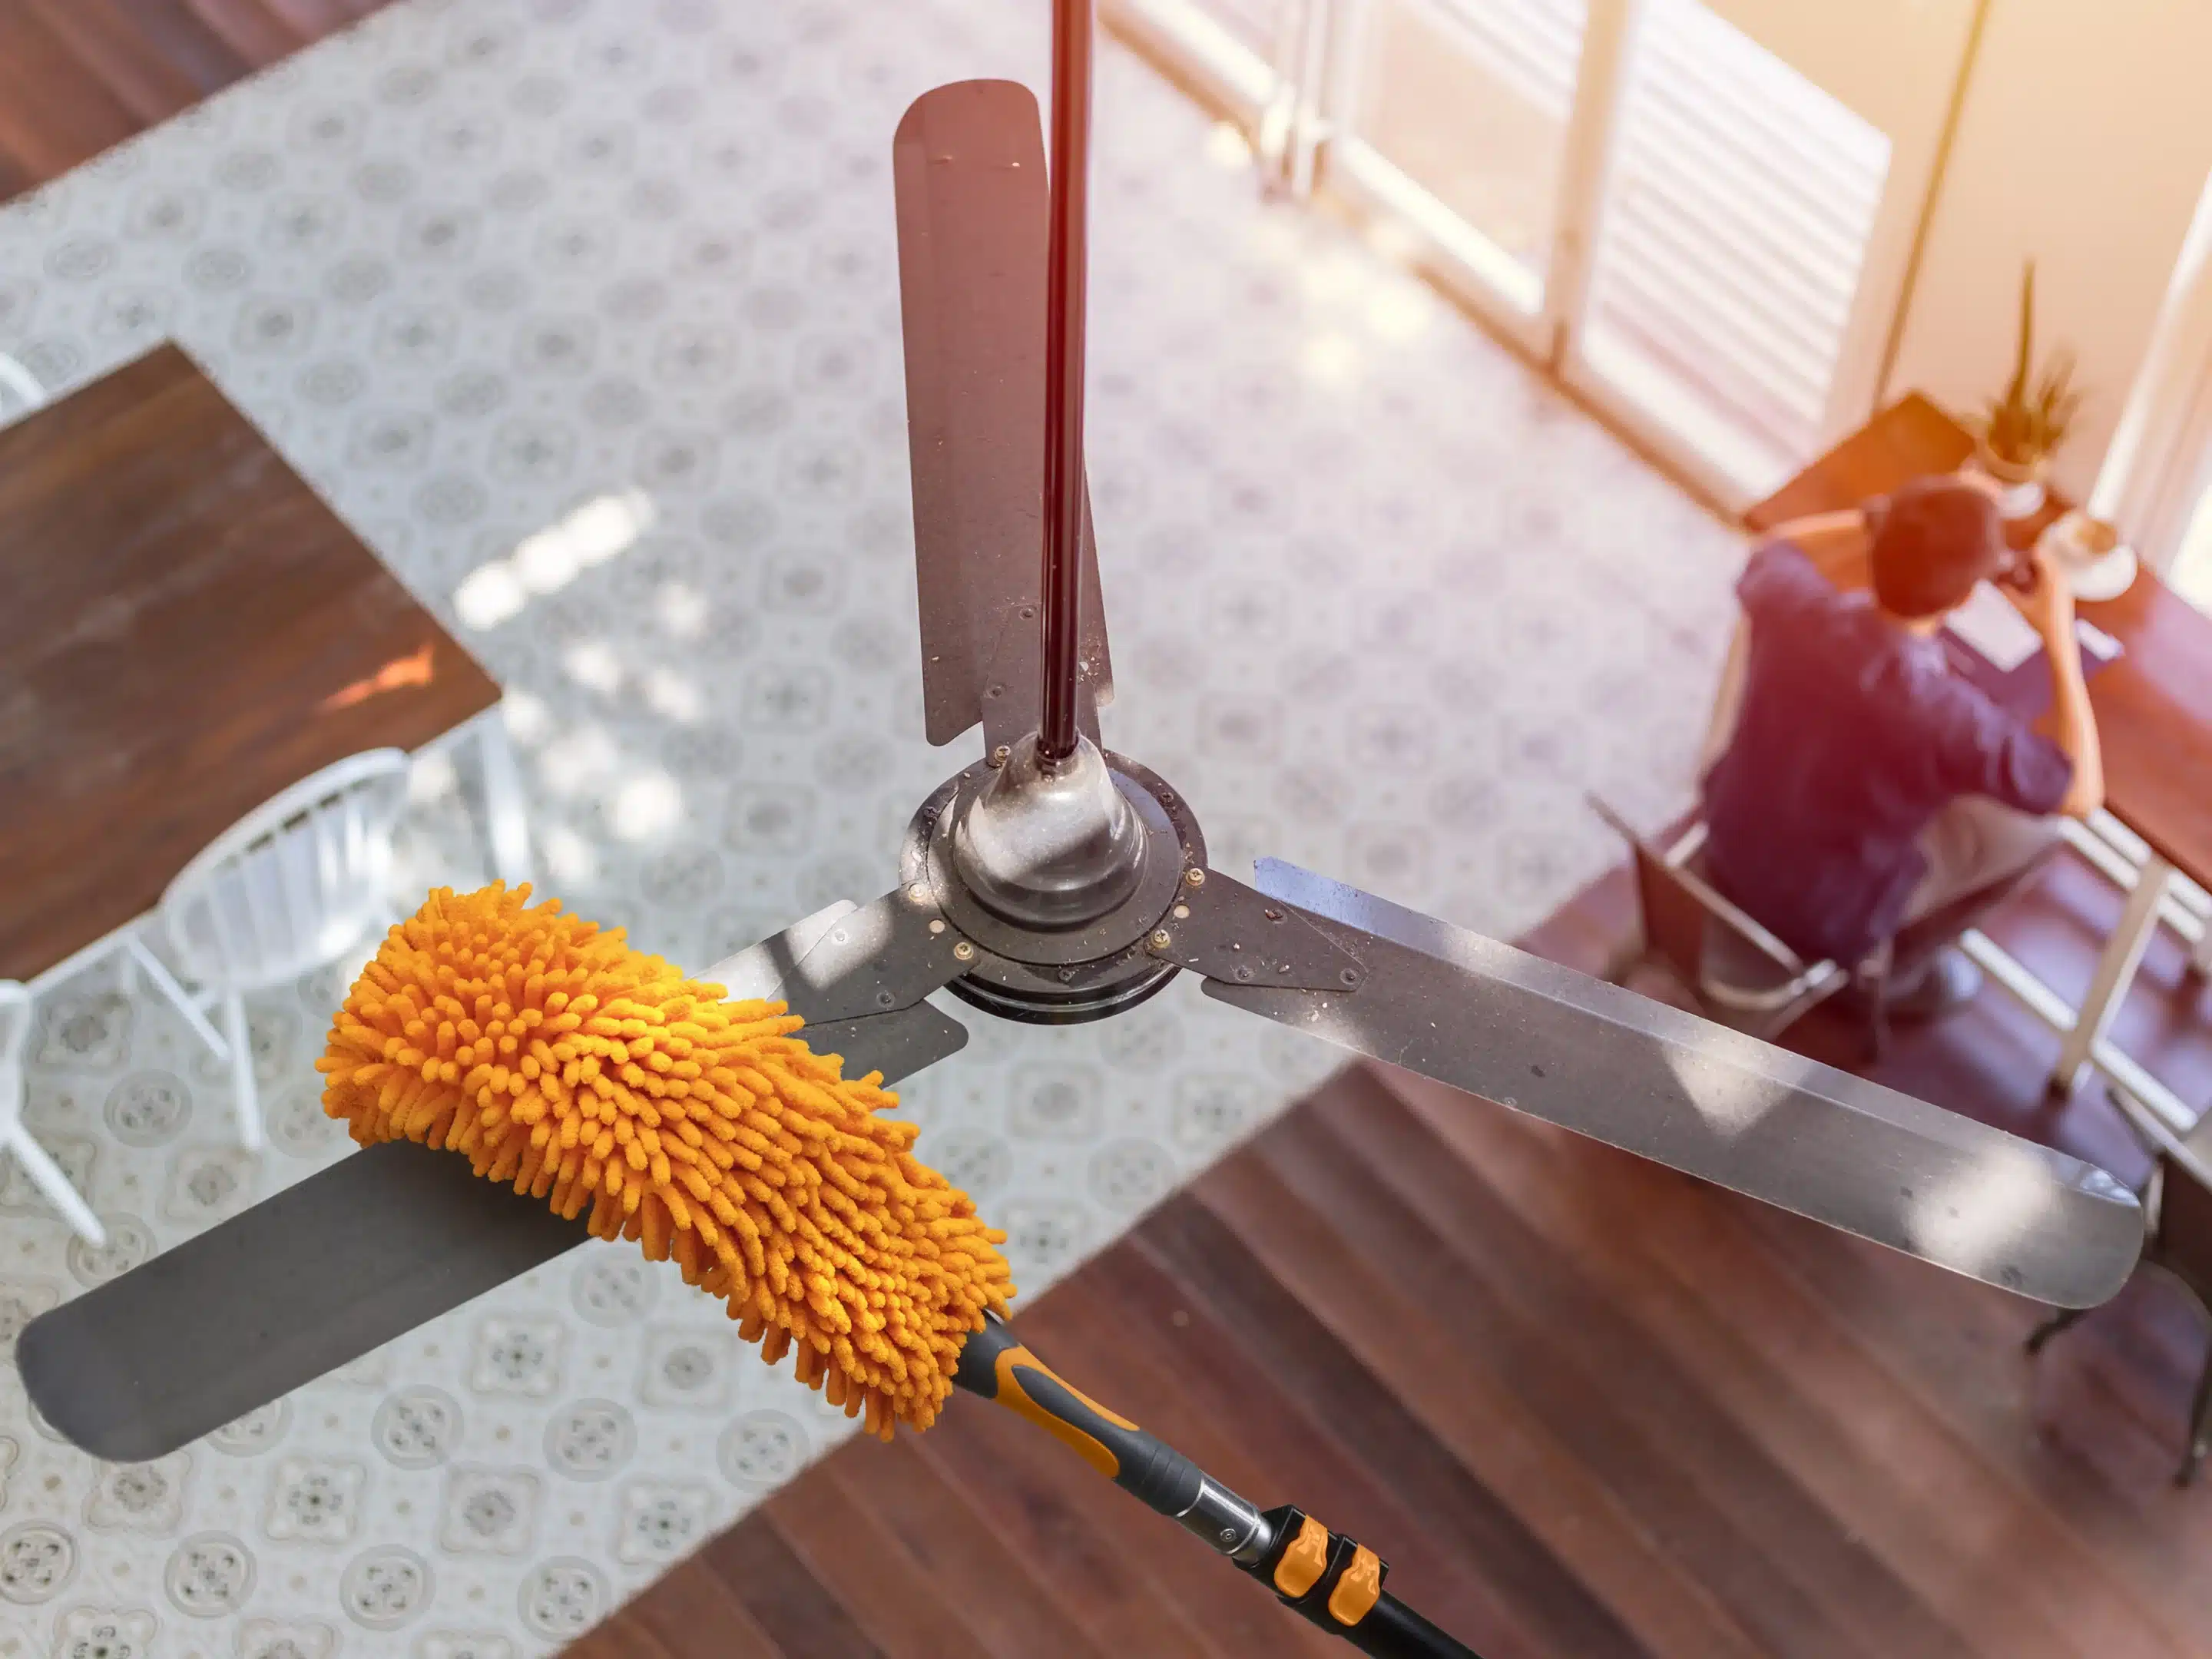 expendable cleaning tools